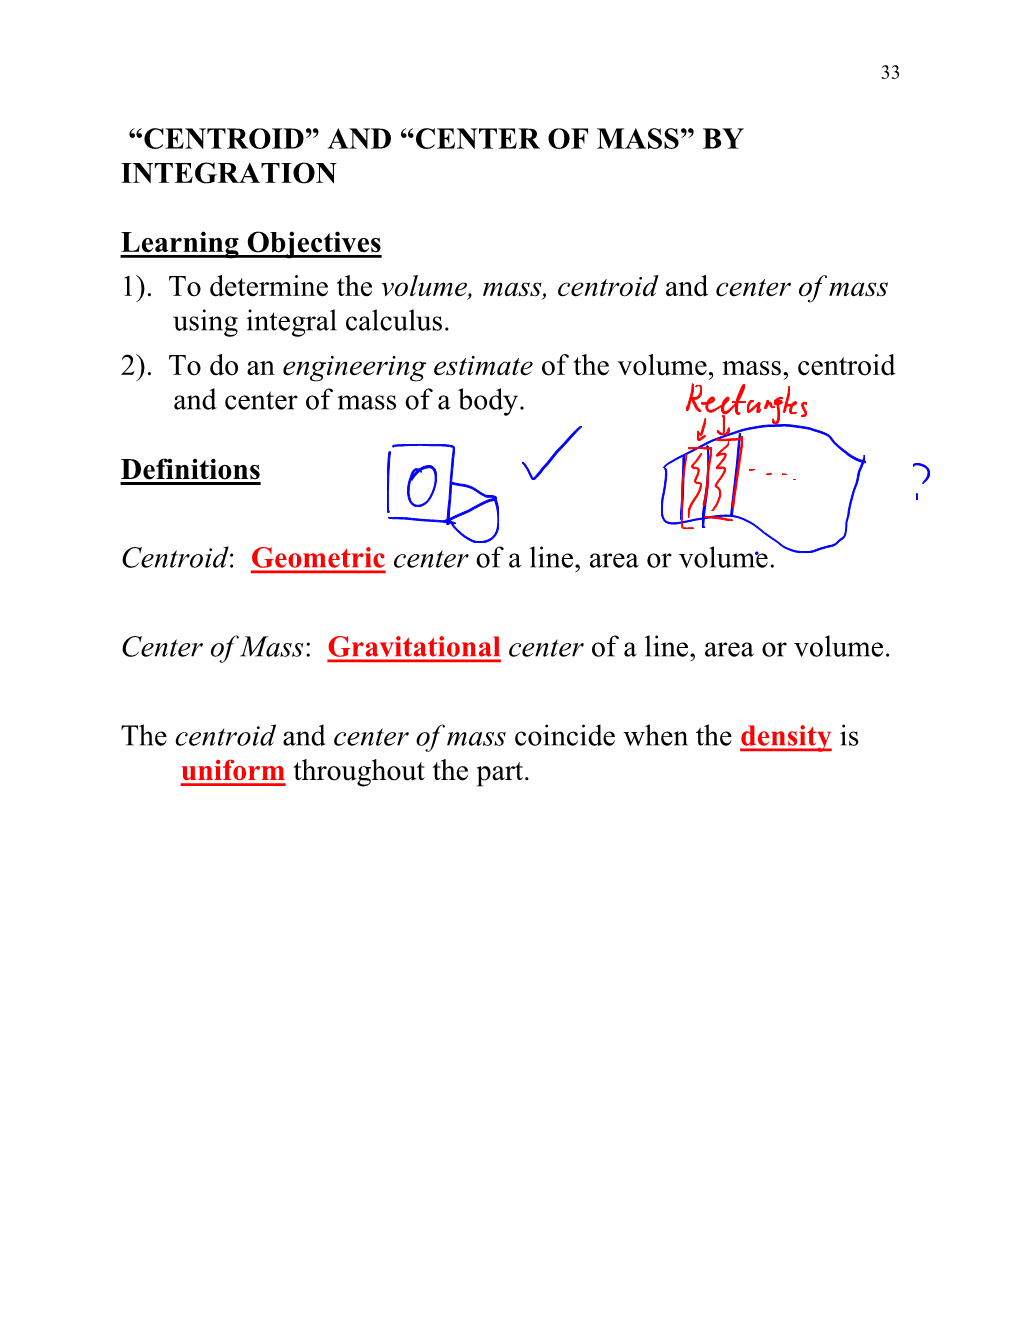 “Centroid” and “Center of Mass” by Integration